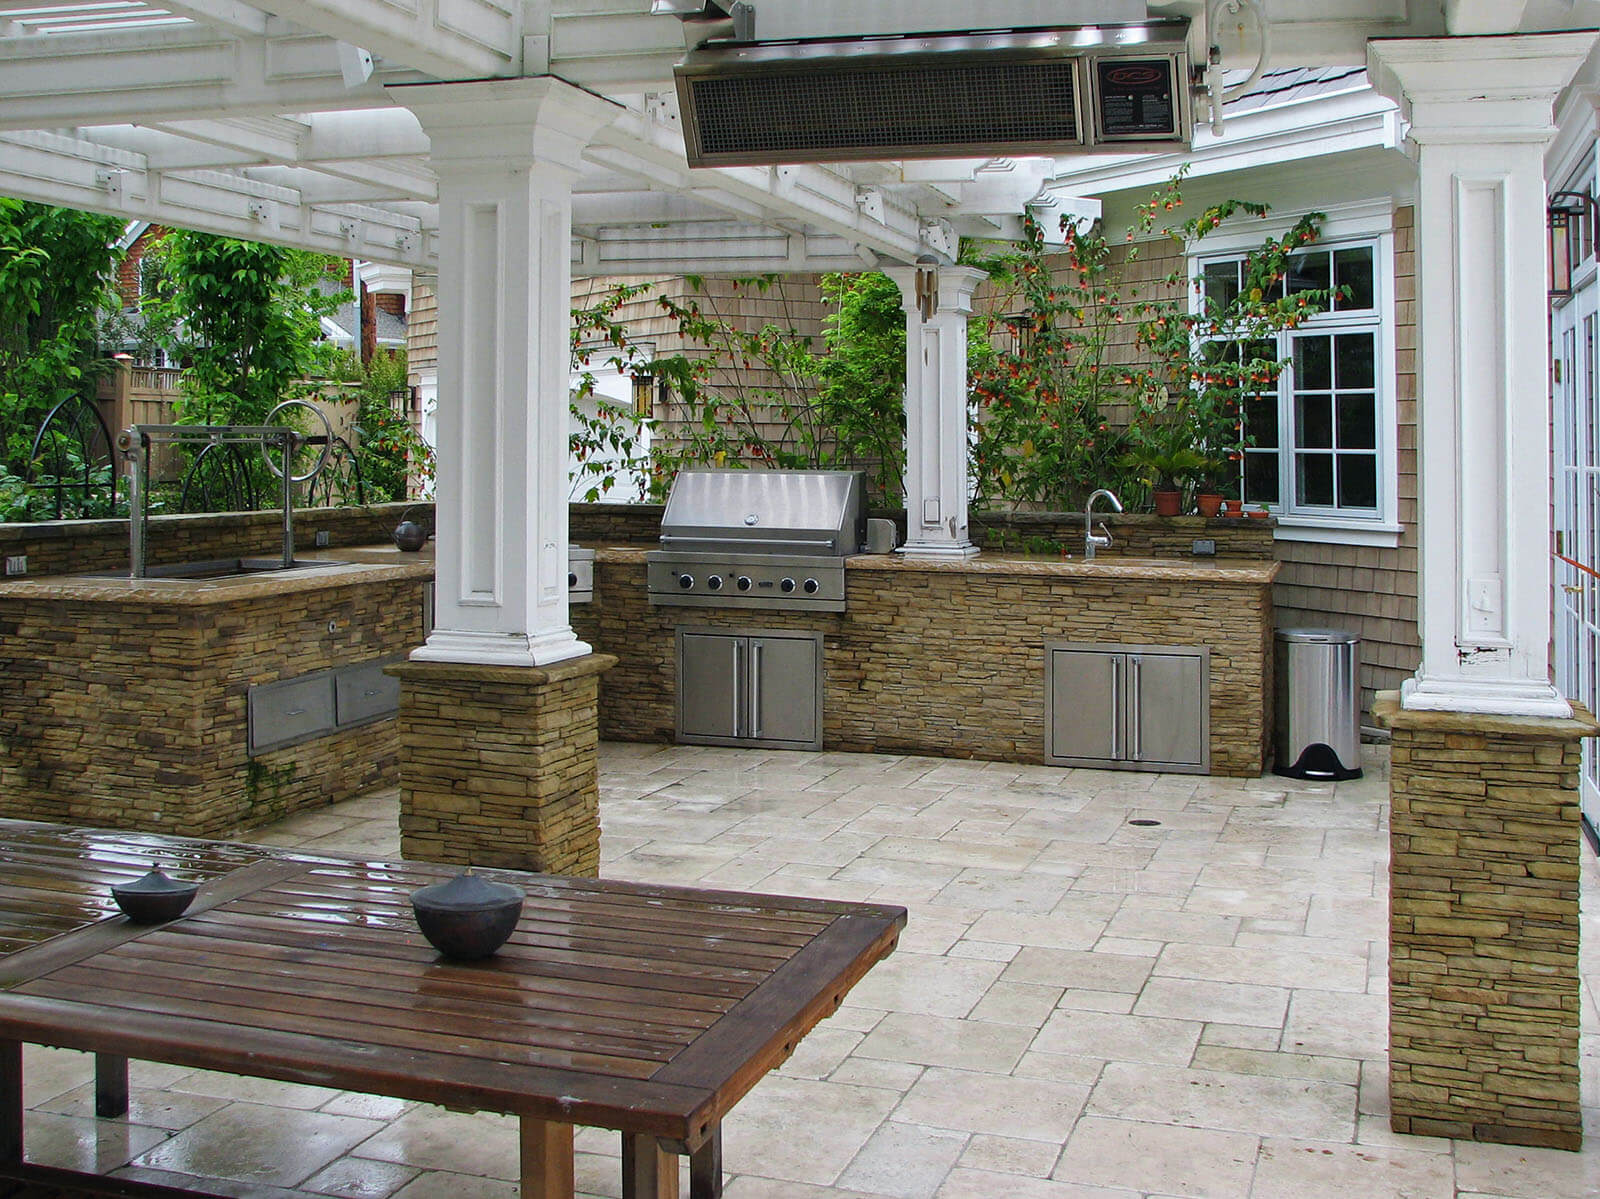 Heated white tile patio with pergola roofing and wide bbq kitchen area with rustic table set